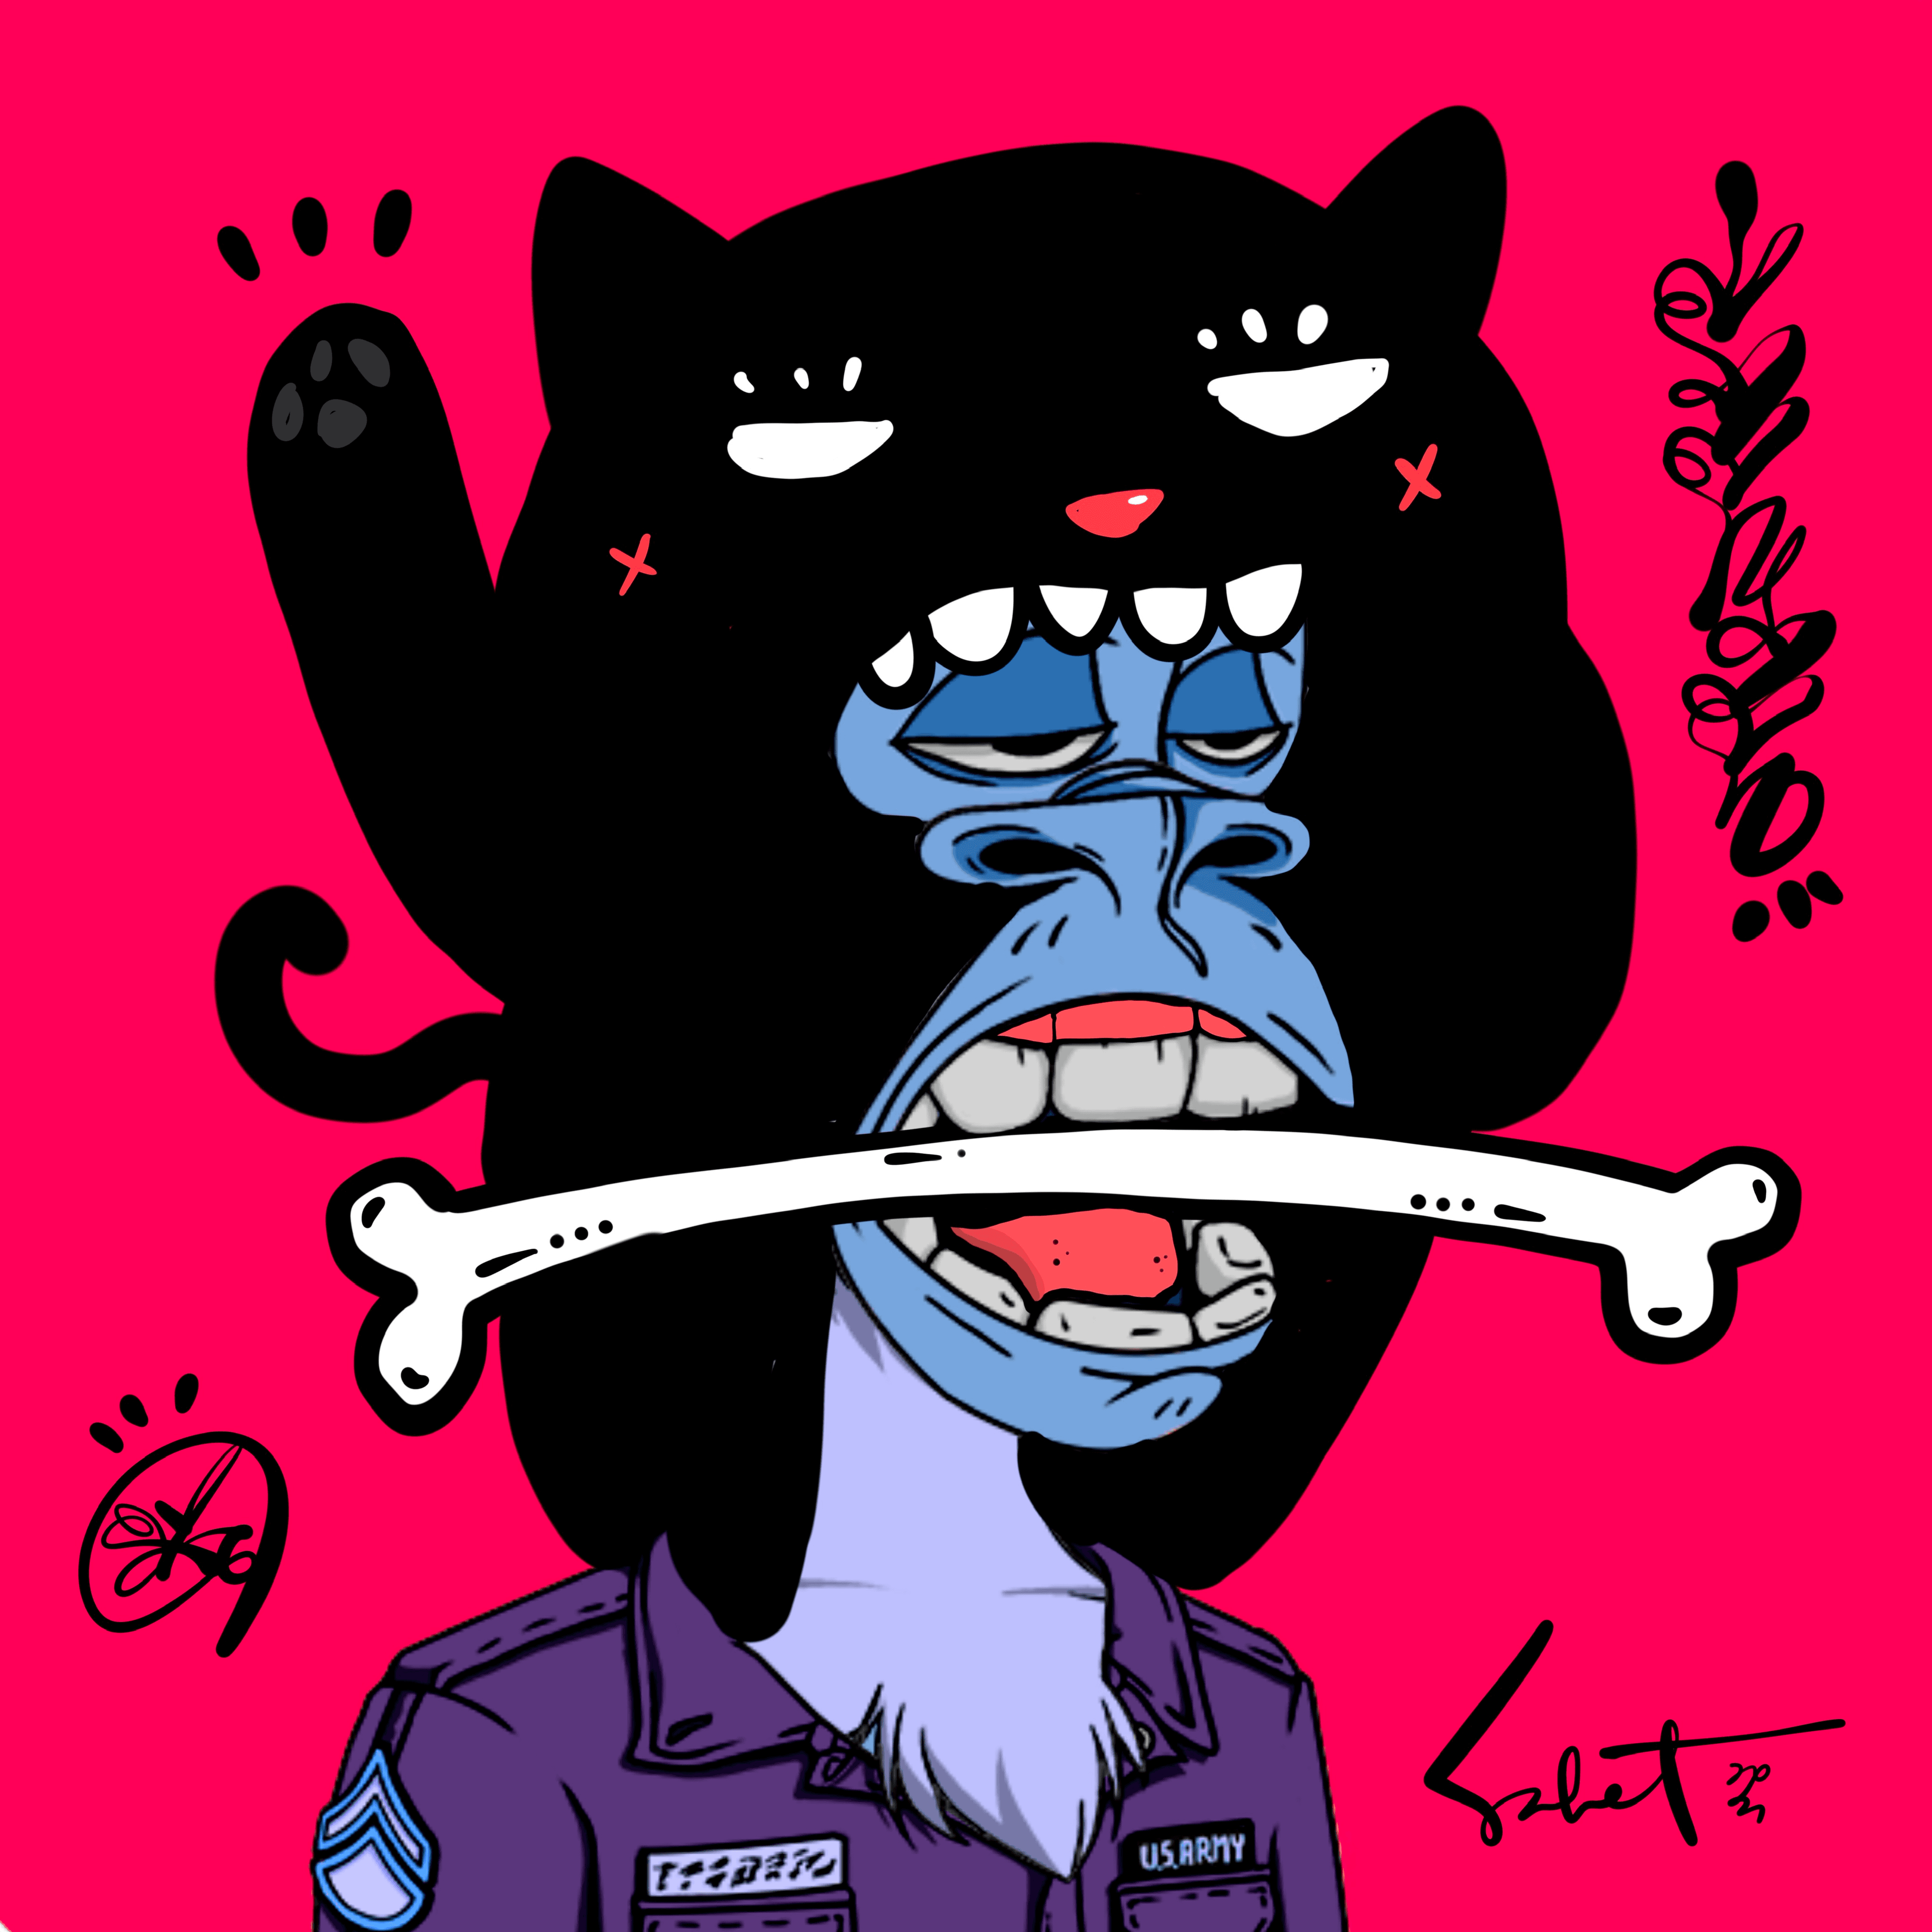 Ugly Kitties by Sabet #149 (Bored Apes Yacht Club Edition)